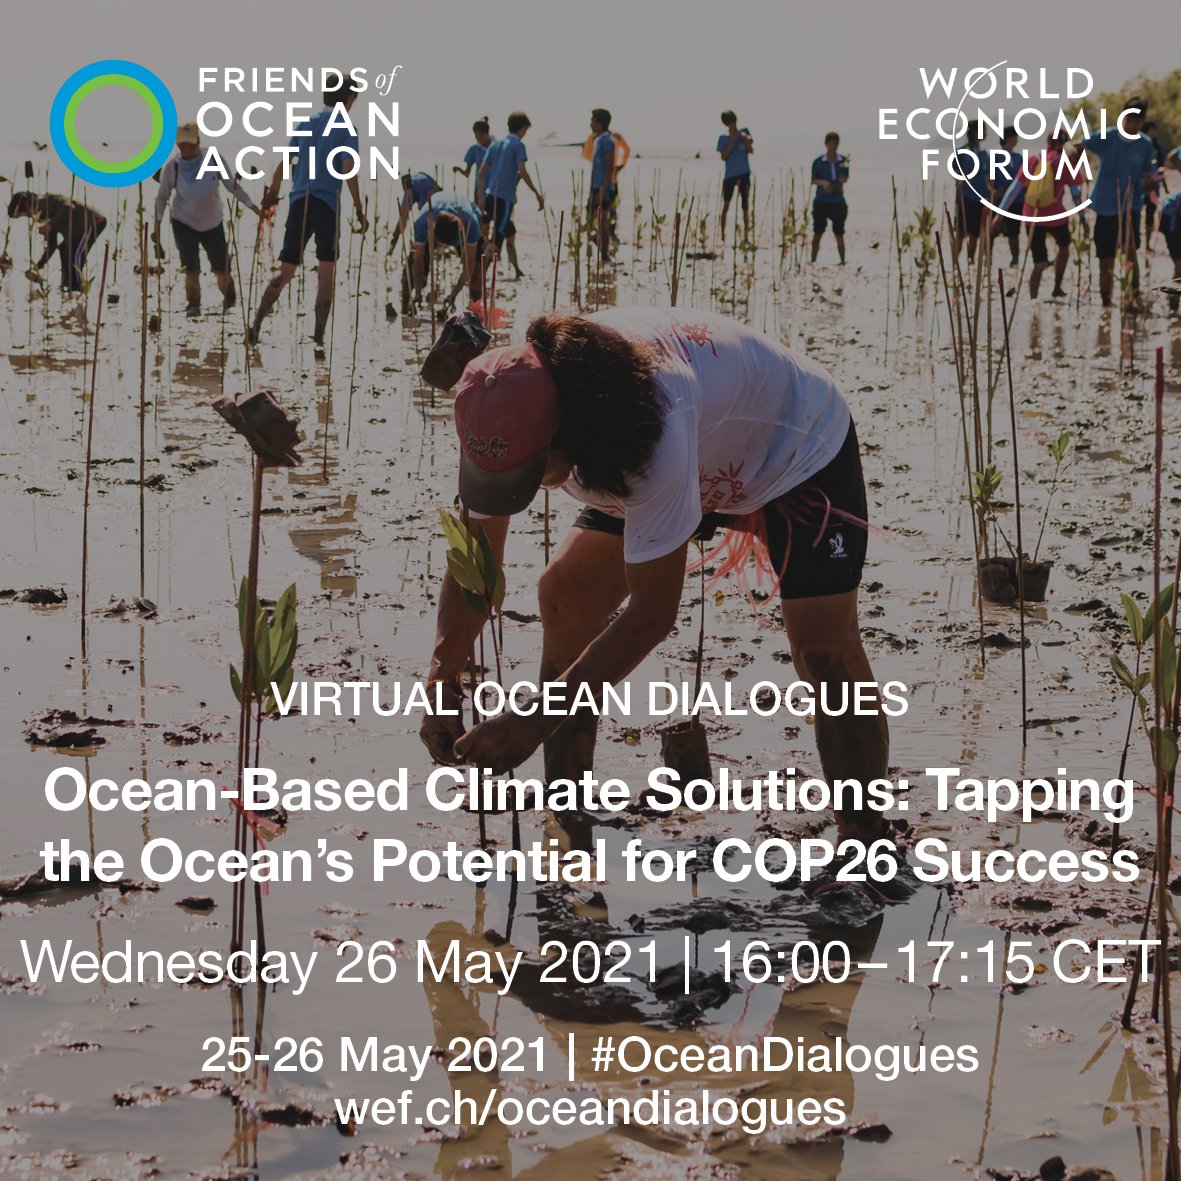 What role should the ocean play in #COP26 later this year? Join @OvaisSarmad, @e_cousens, @ZacGoldsmith, @ANGIEPOPS11, @gmunozabogabir and Cherie Nursalim as we uncover ocean-based climate solutions in this @FriendsofOcean @wef Virtual #OceanDialogues at wef.ch/oceandialogues